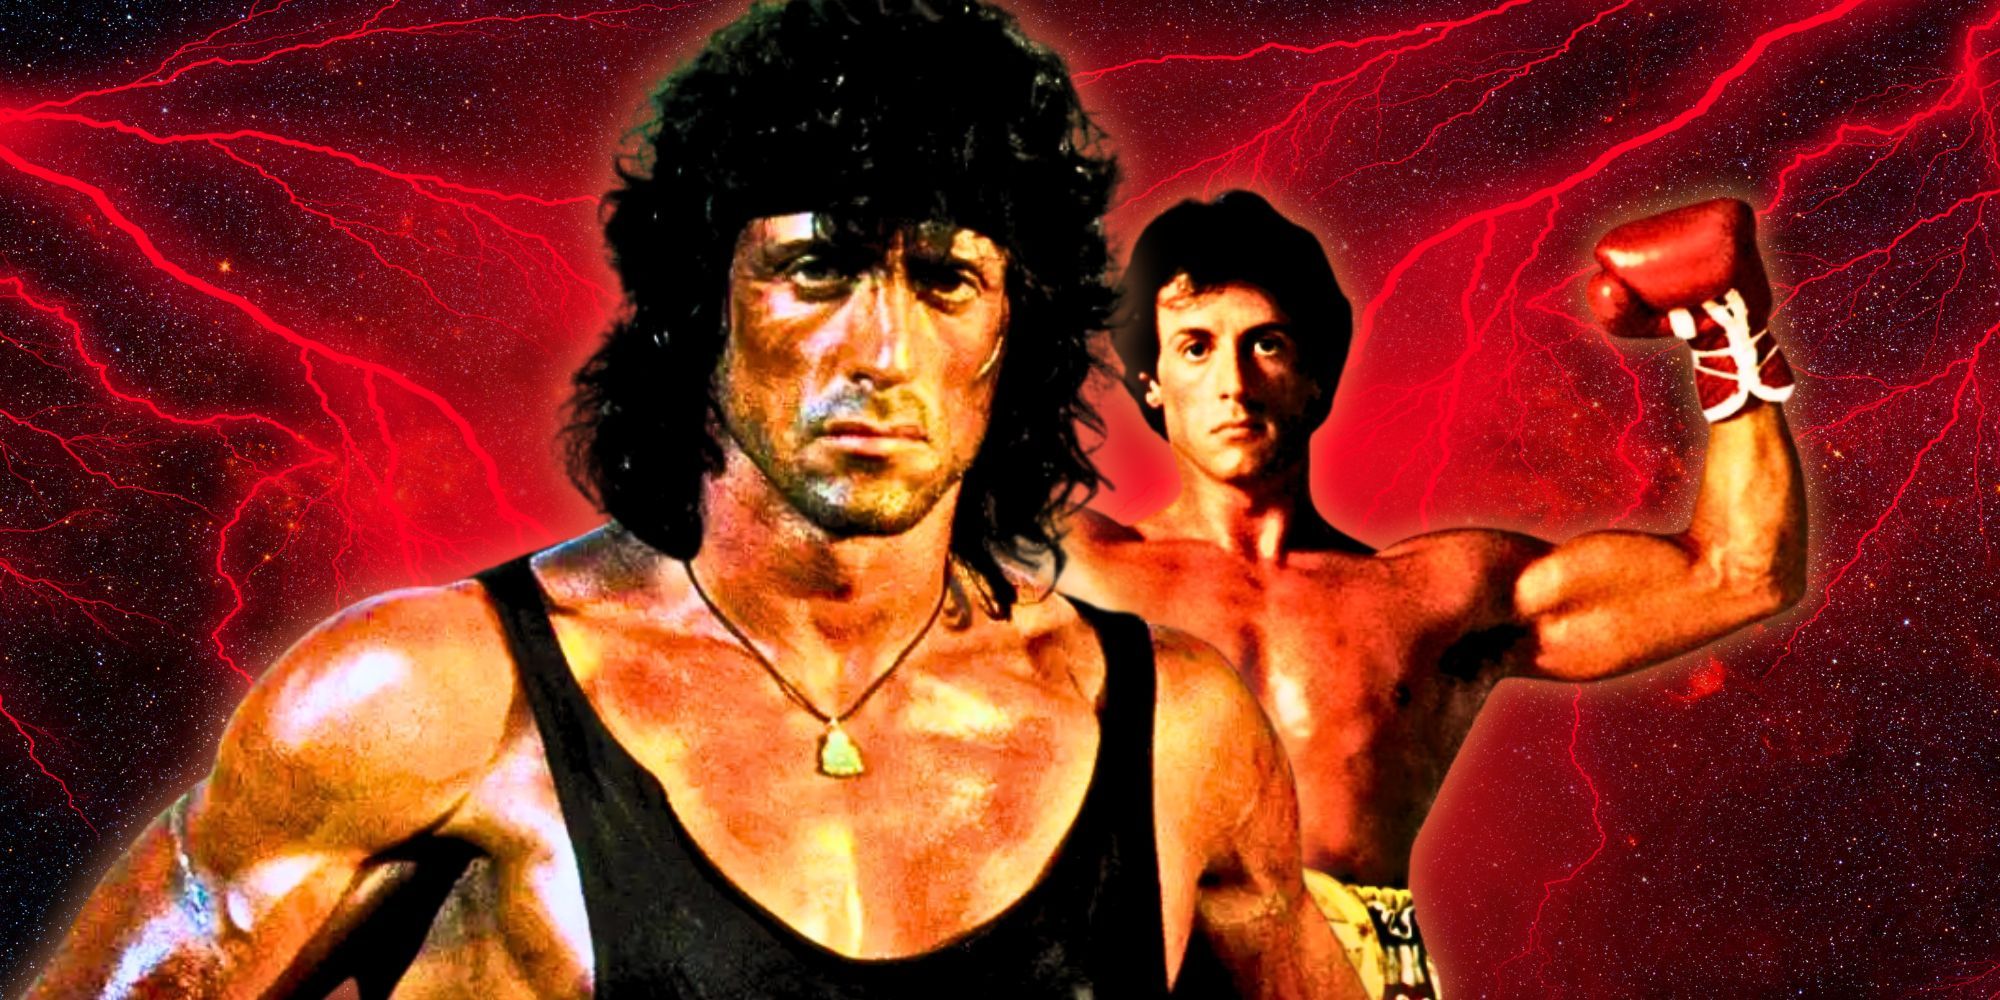 13 Action Heroes Played By Sylvester Stallone, Ranked Weakest To Strongest